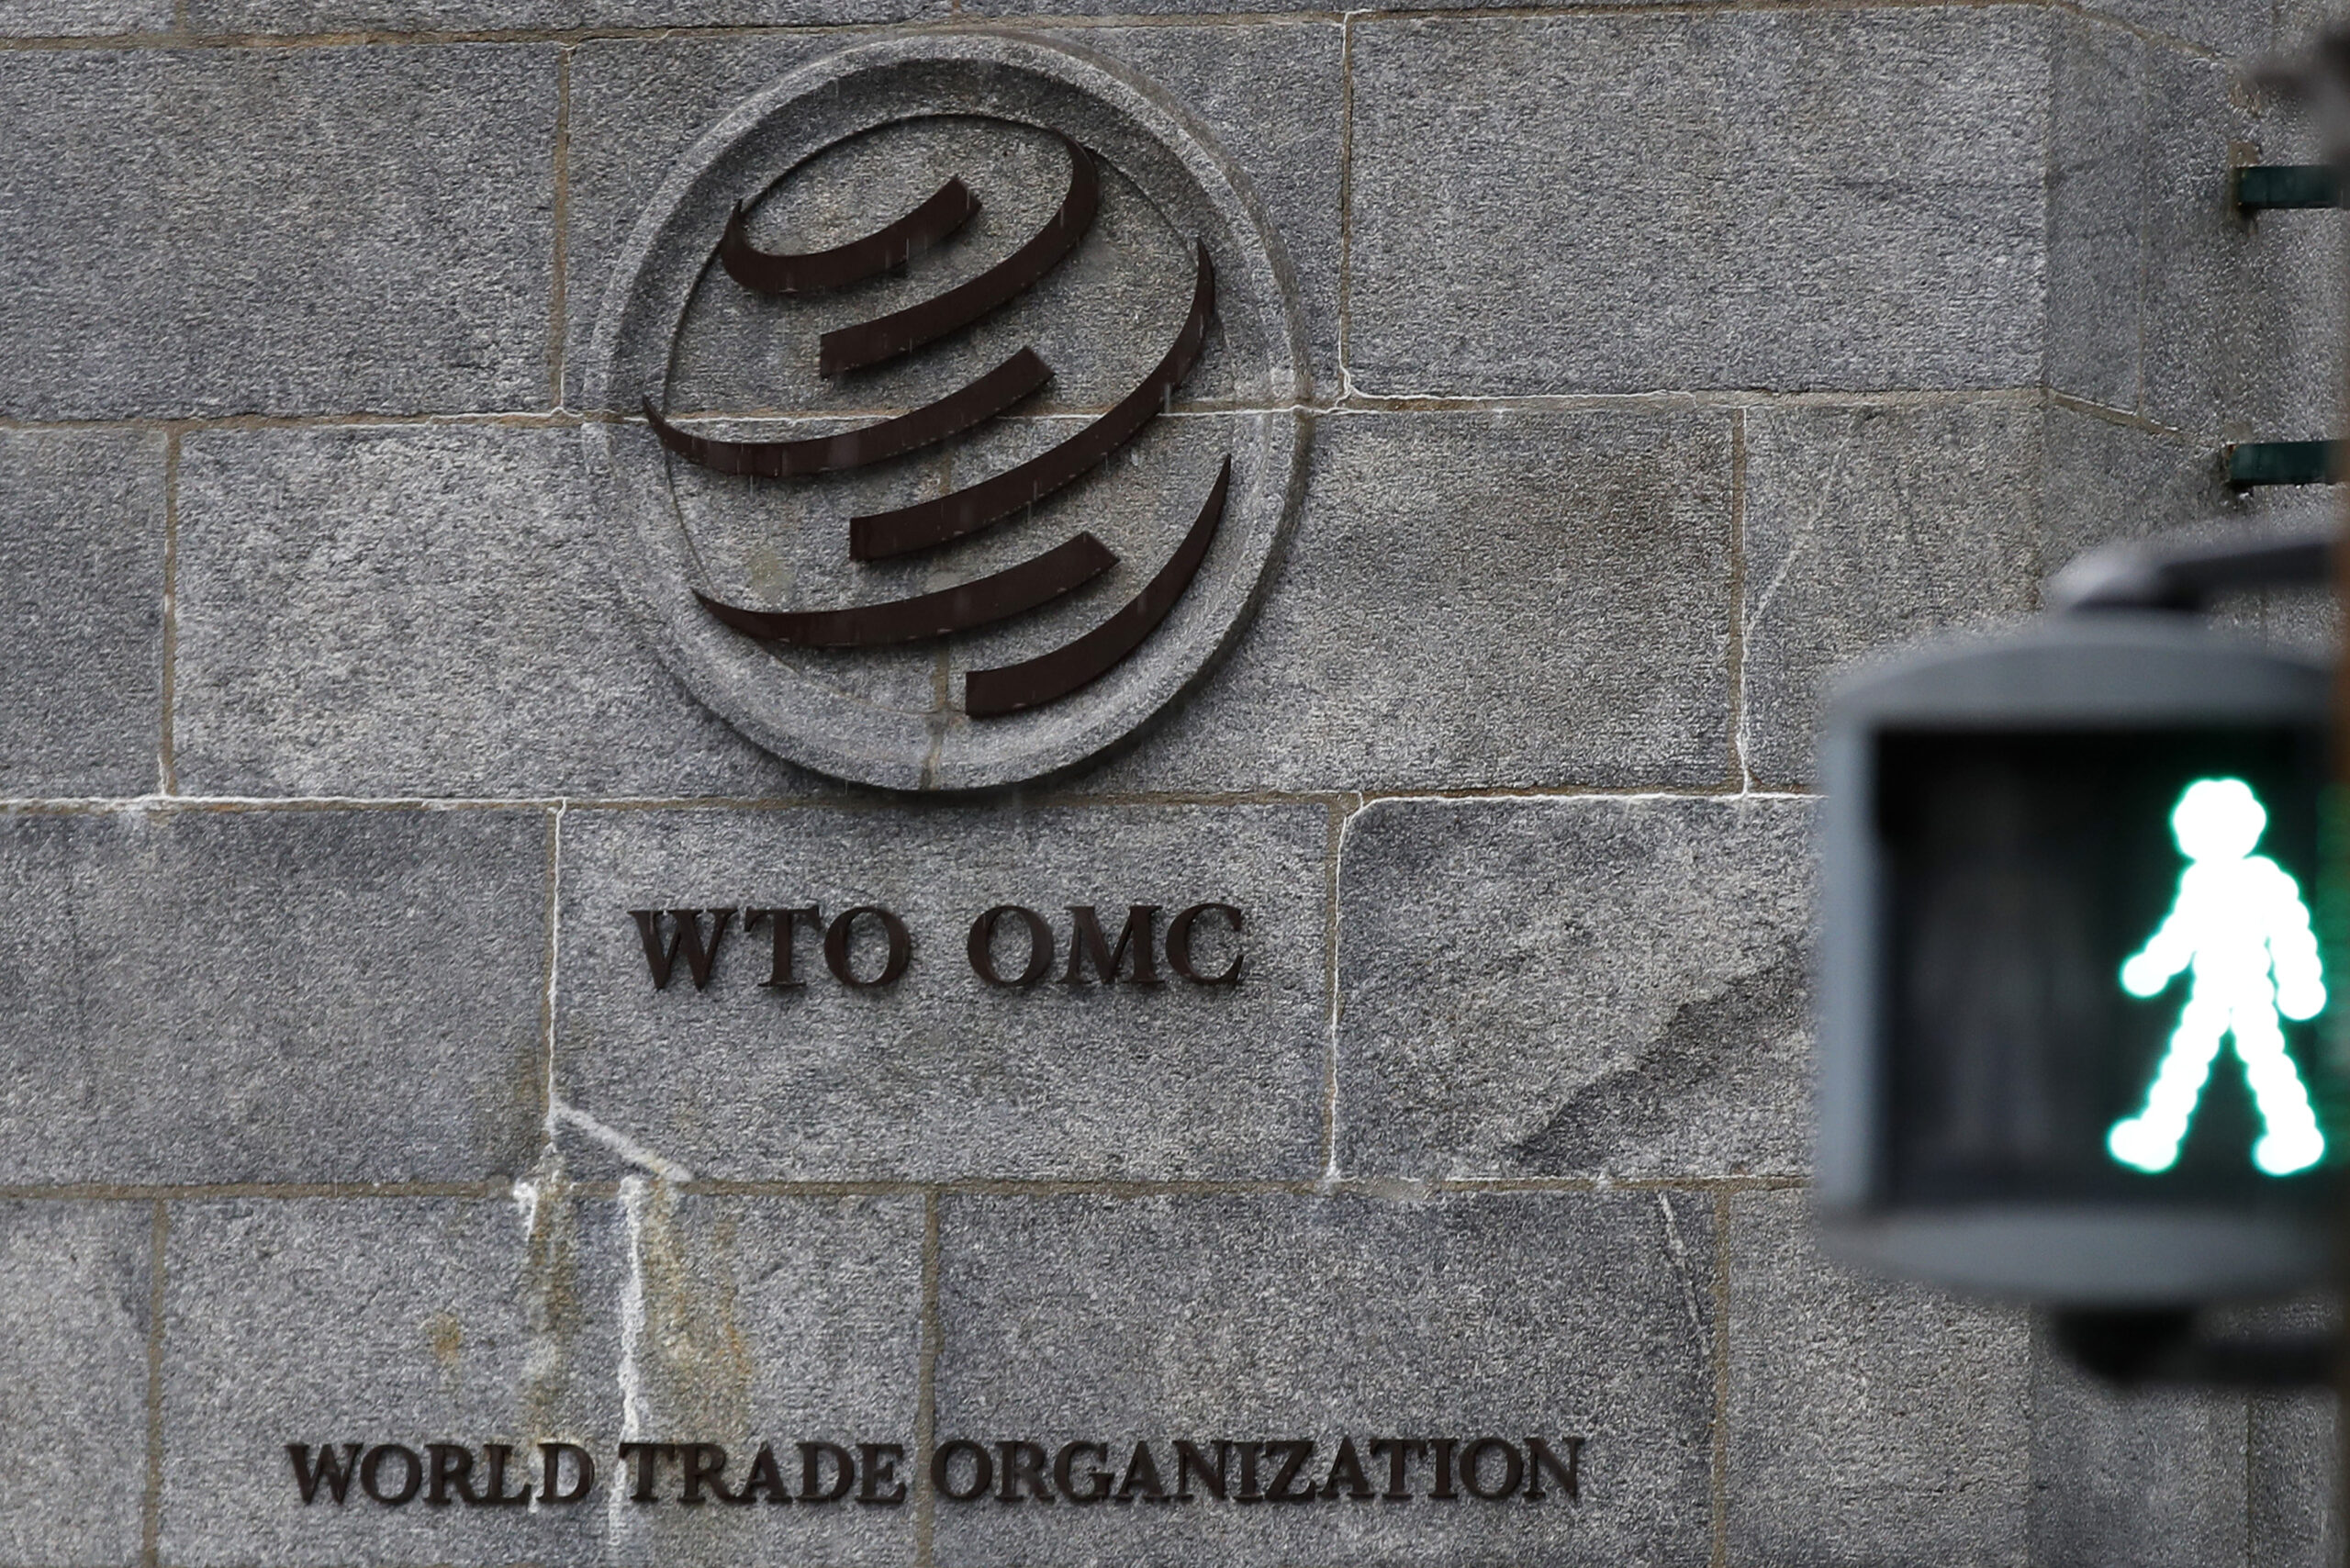 A logo stands on the wall outside the World Trade Organisation (WTO) headquarters in Geneva, Switzerland on 2 March 2020 [Stefan Wermuth/Bloomberg/Getty Images]